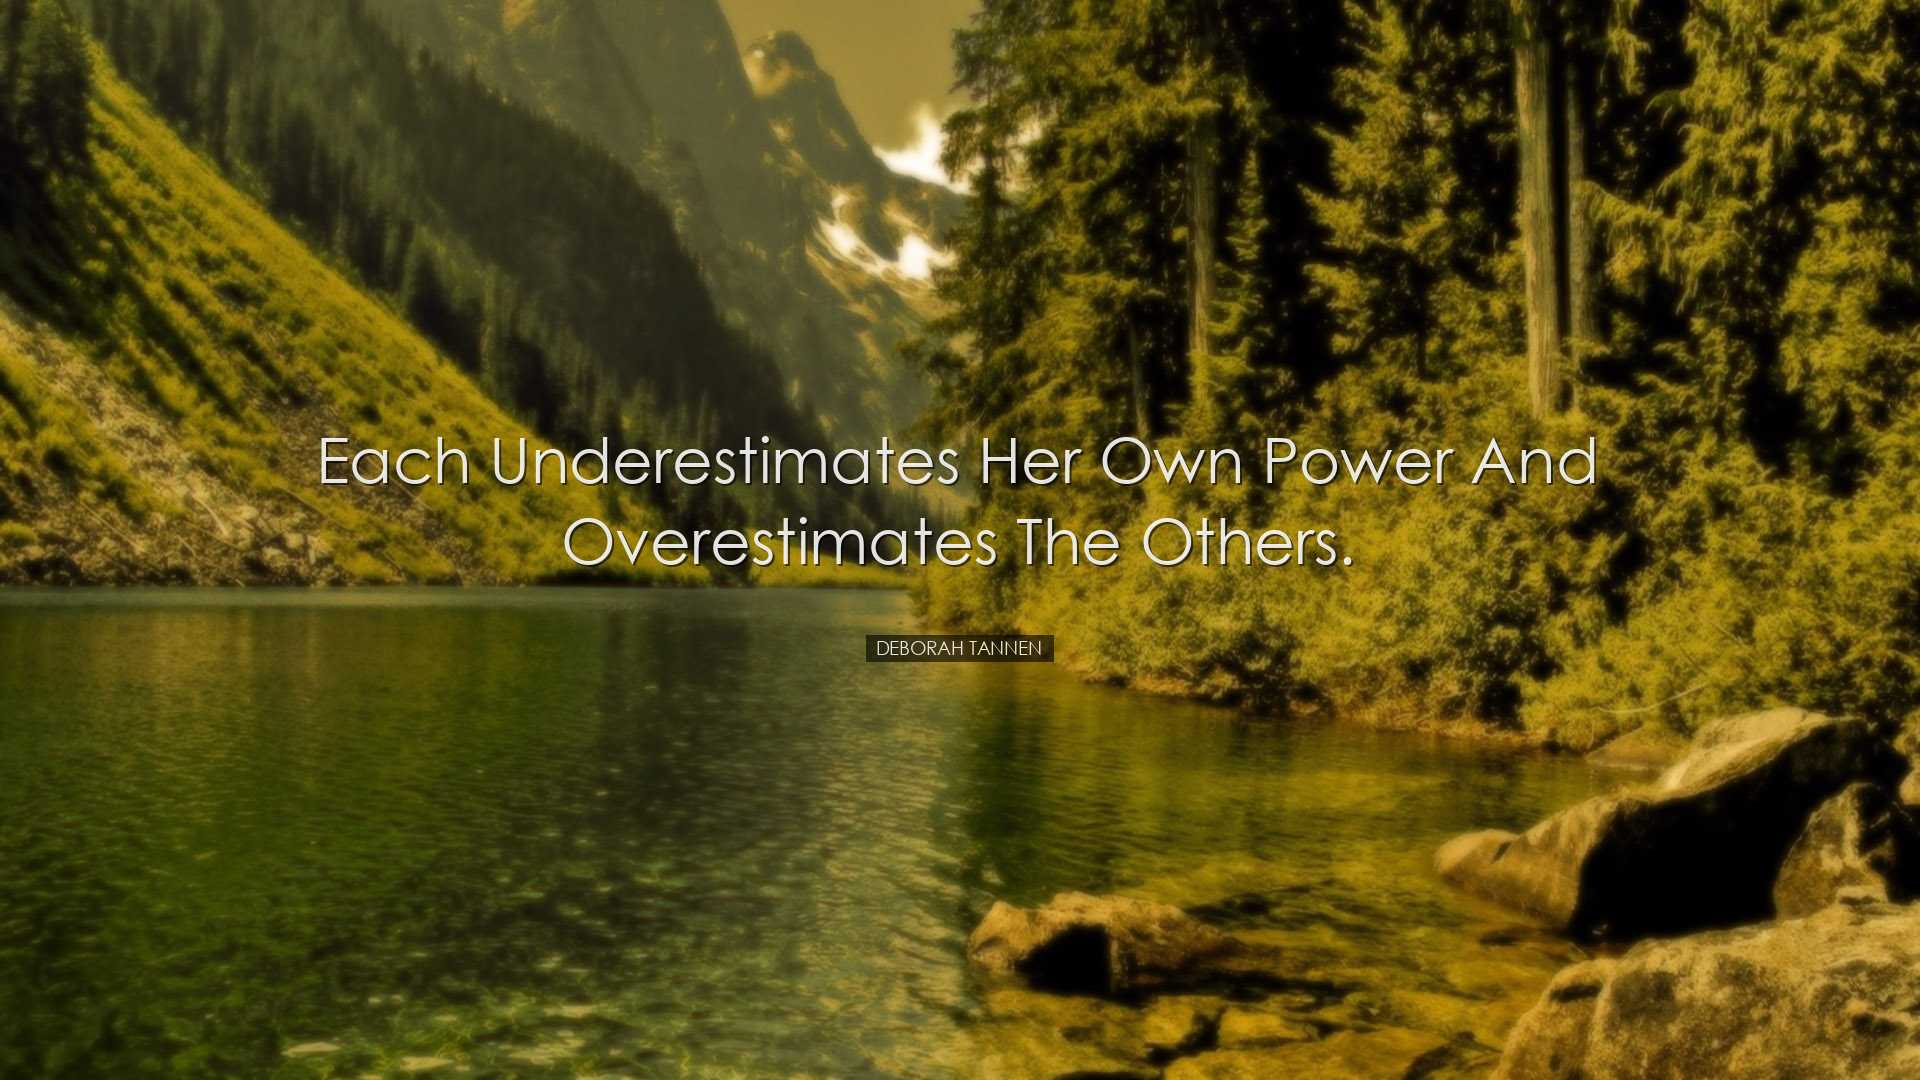 Each underestimates her own power and overestimates the others. -